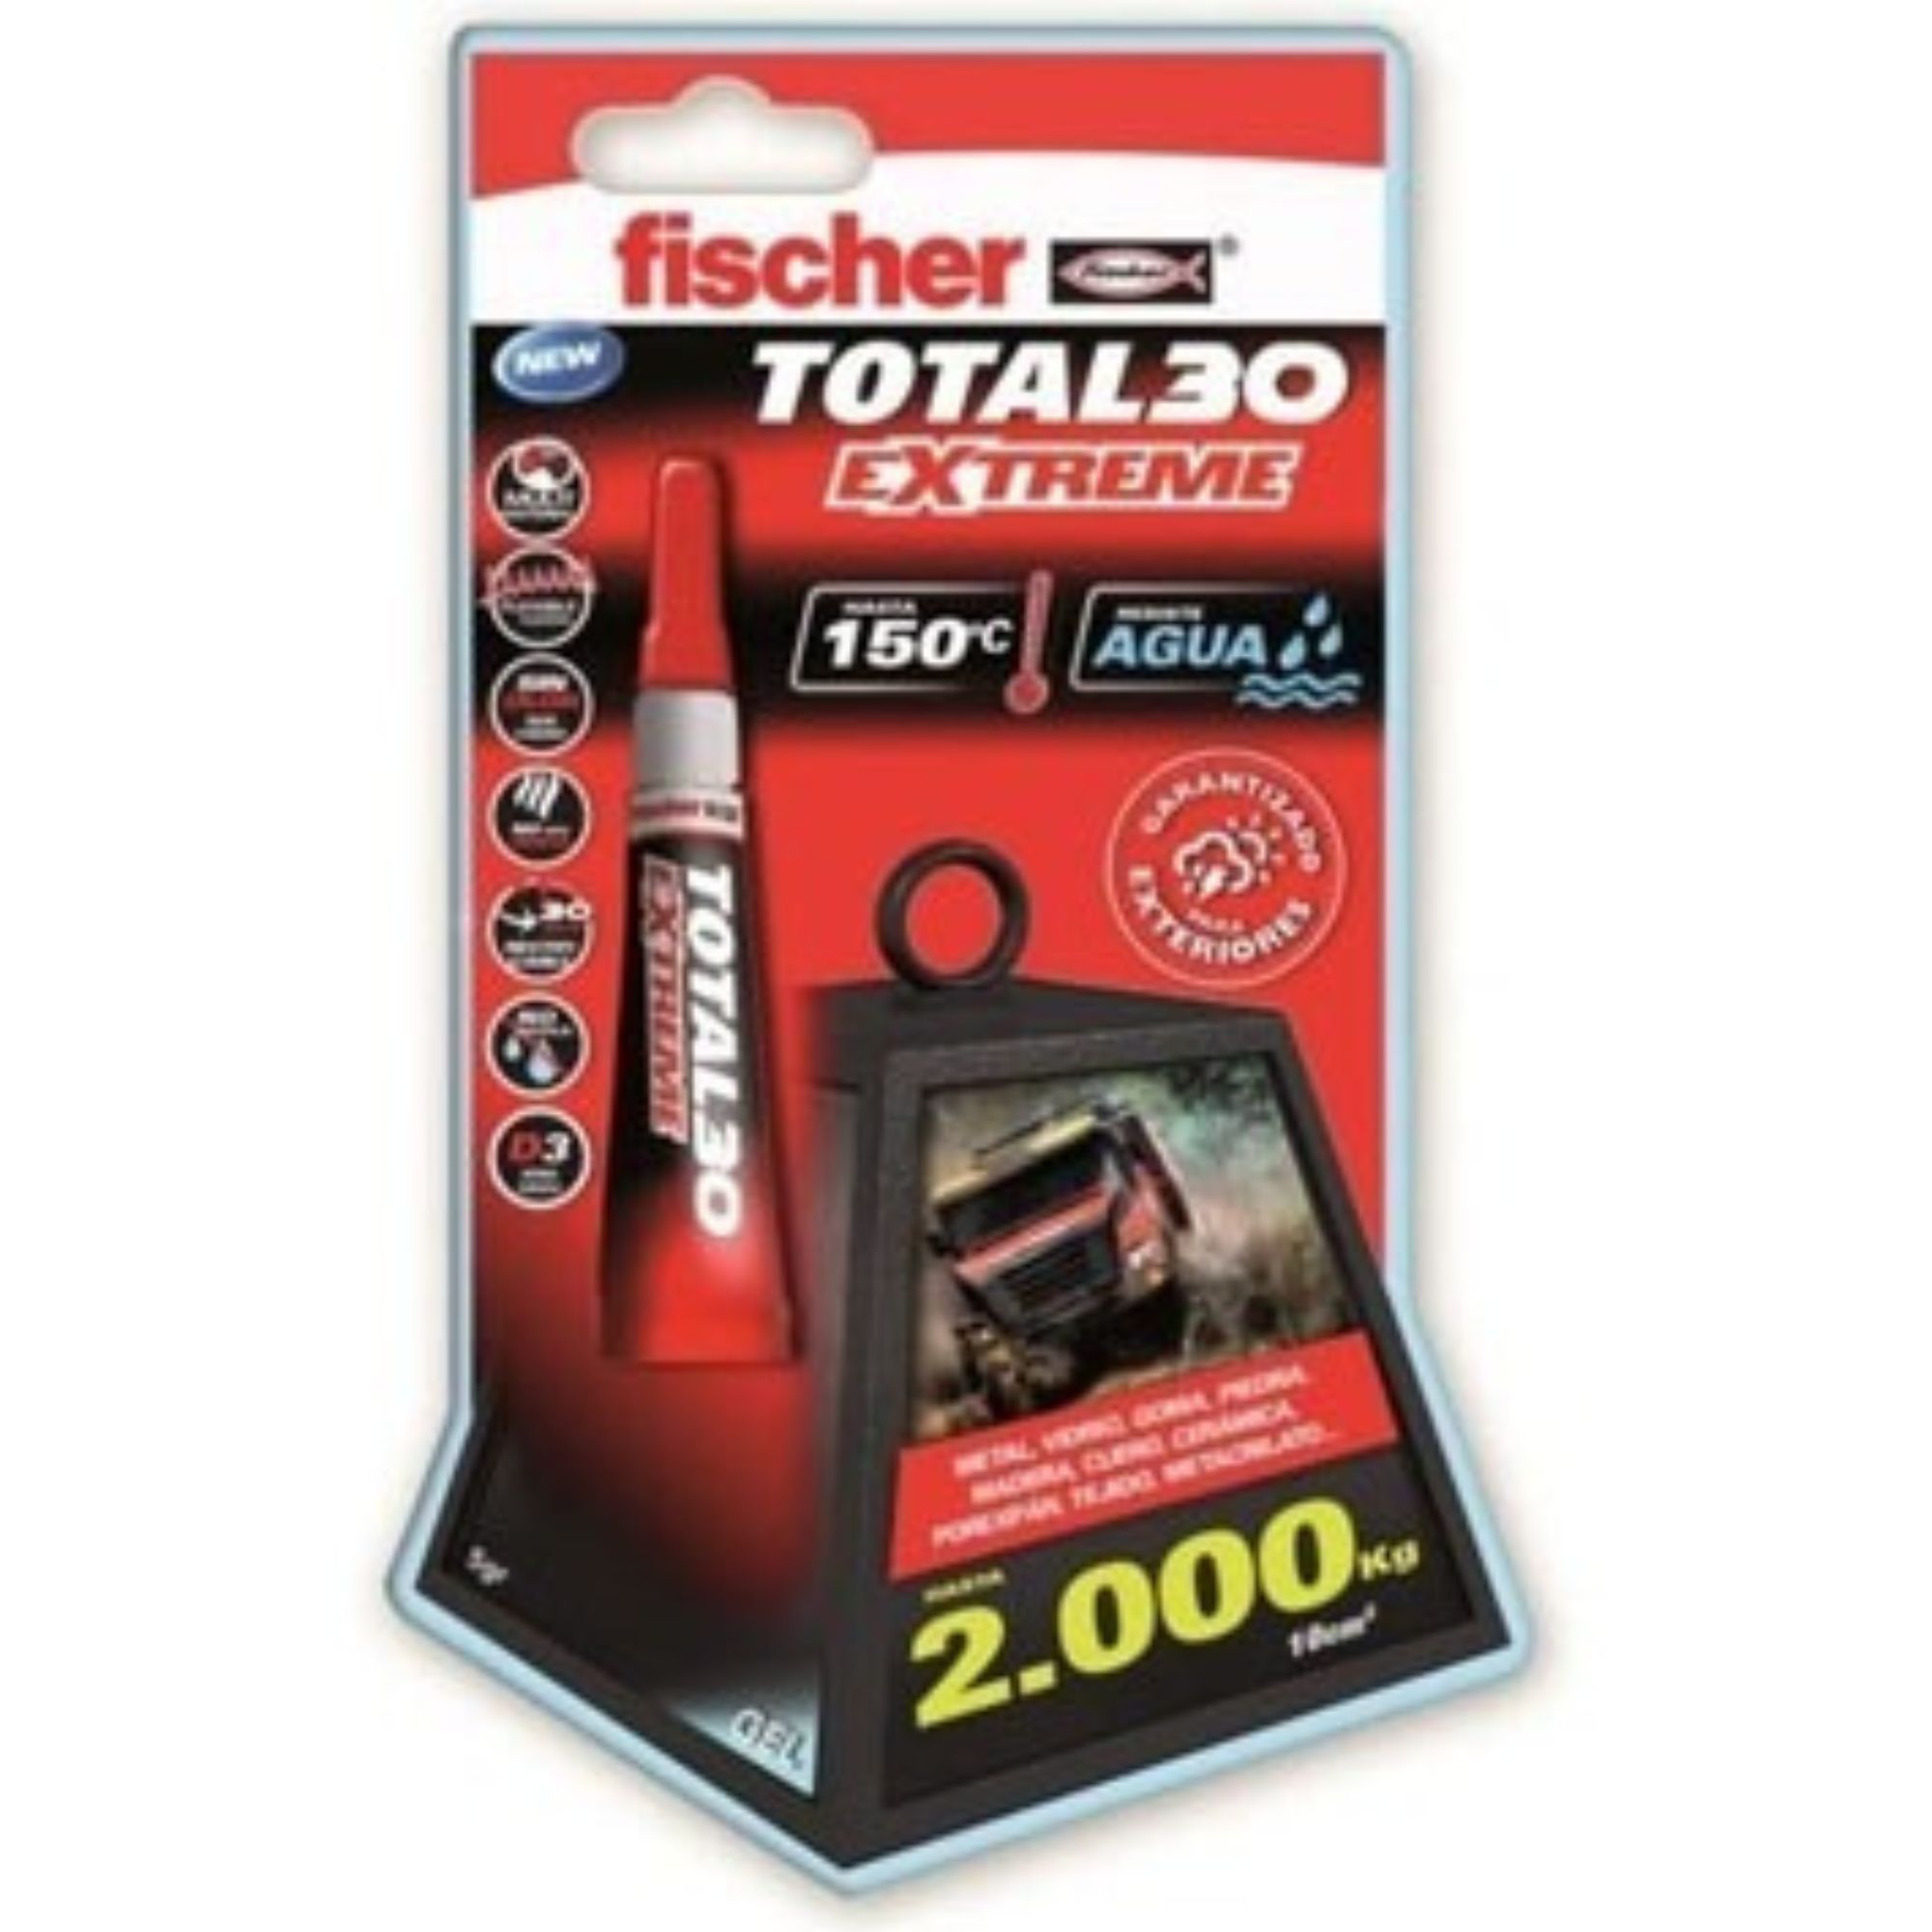 BLISTER COLA TOTAL 30 EXTREME - 15Gr FISCHER